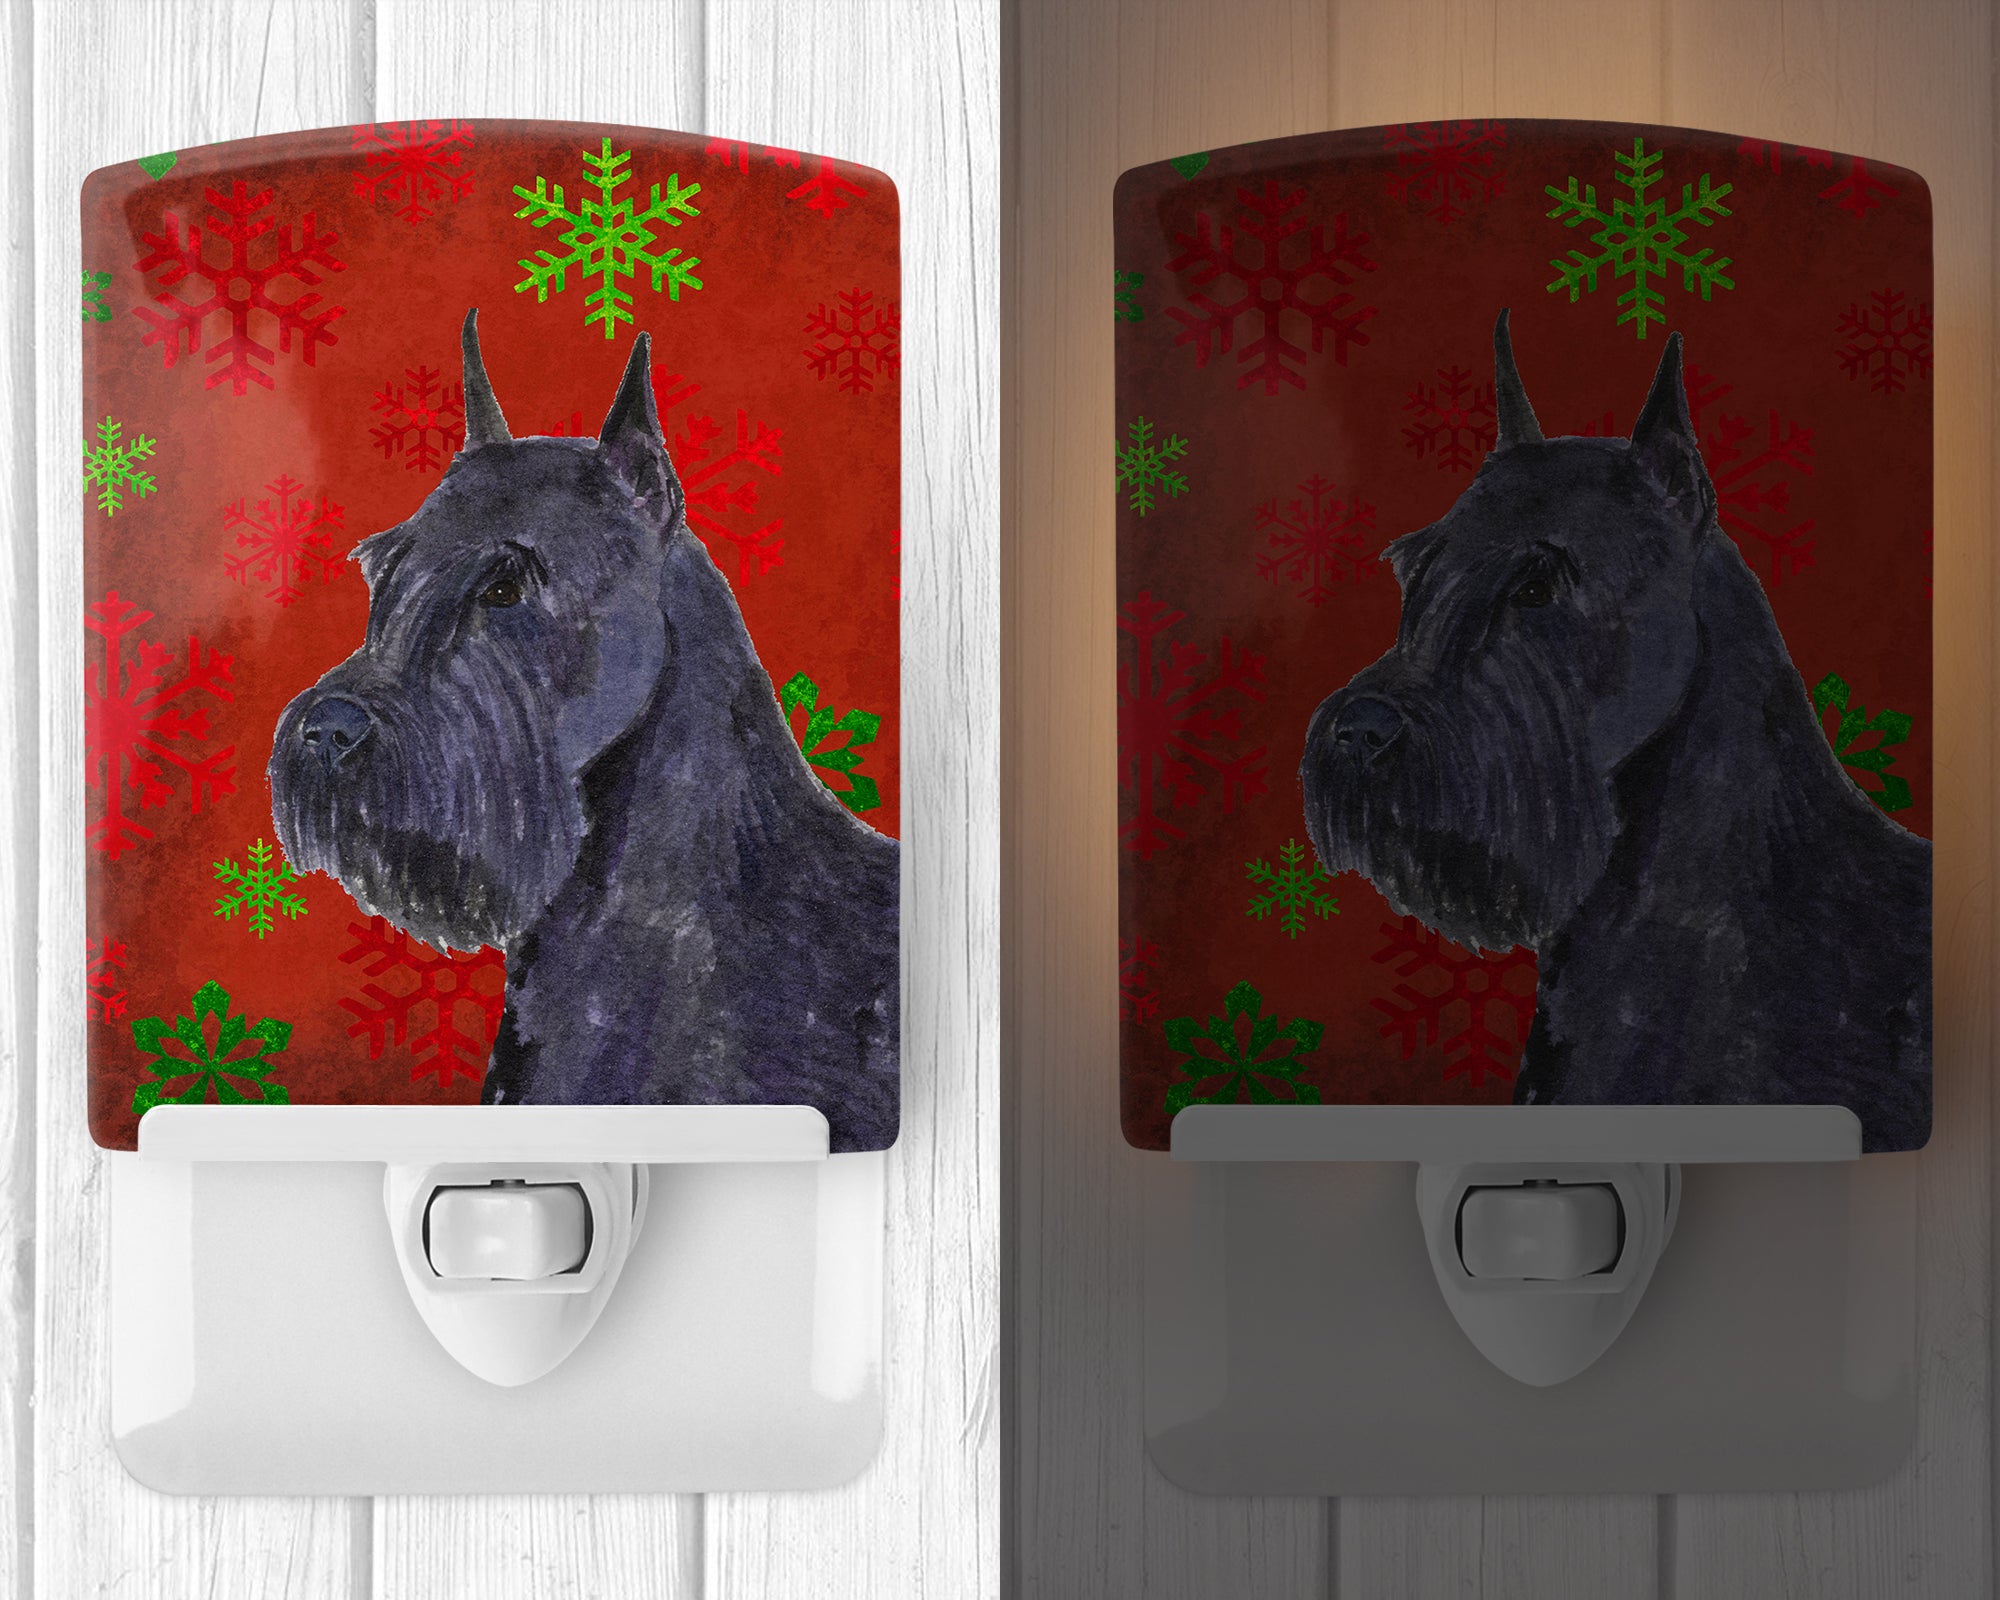 Schnauzer Red and Green Snowflakes Holiday Christmas Ceramic Night Light SS4730CNL - the-store.com